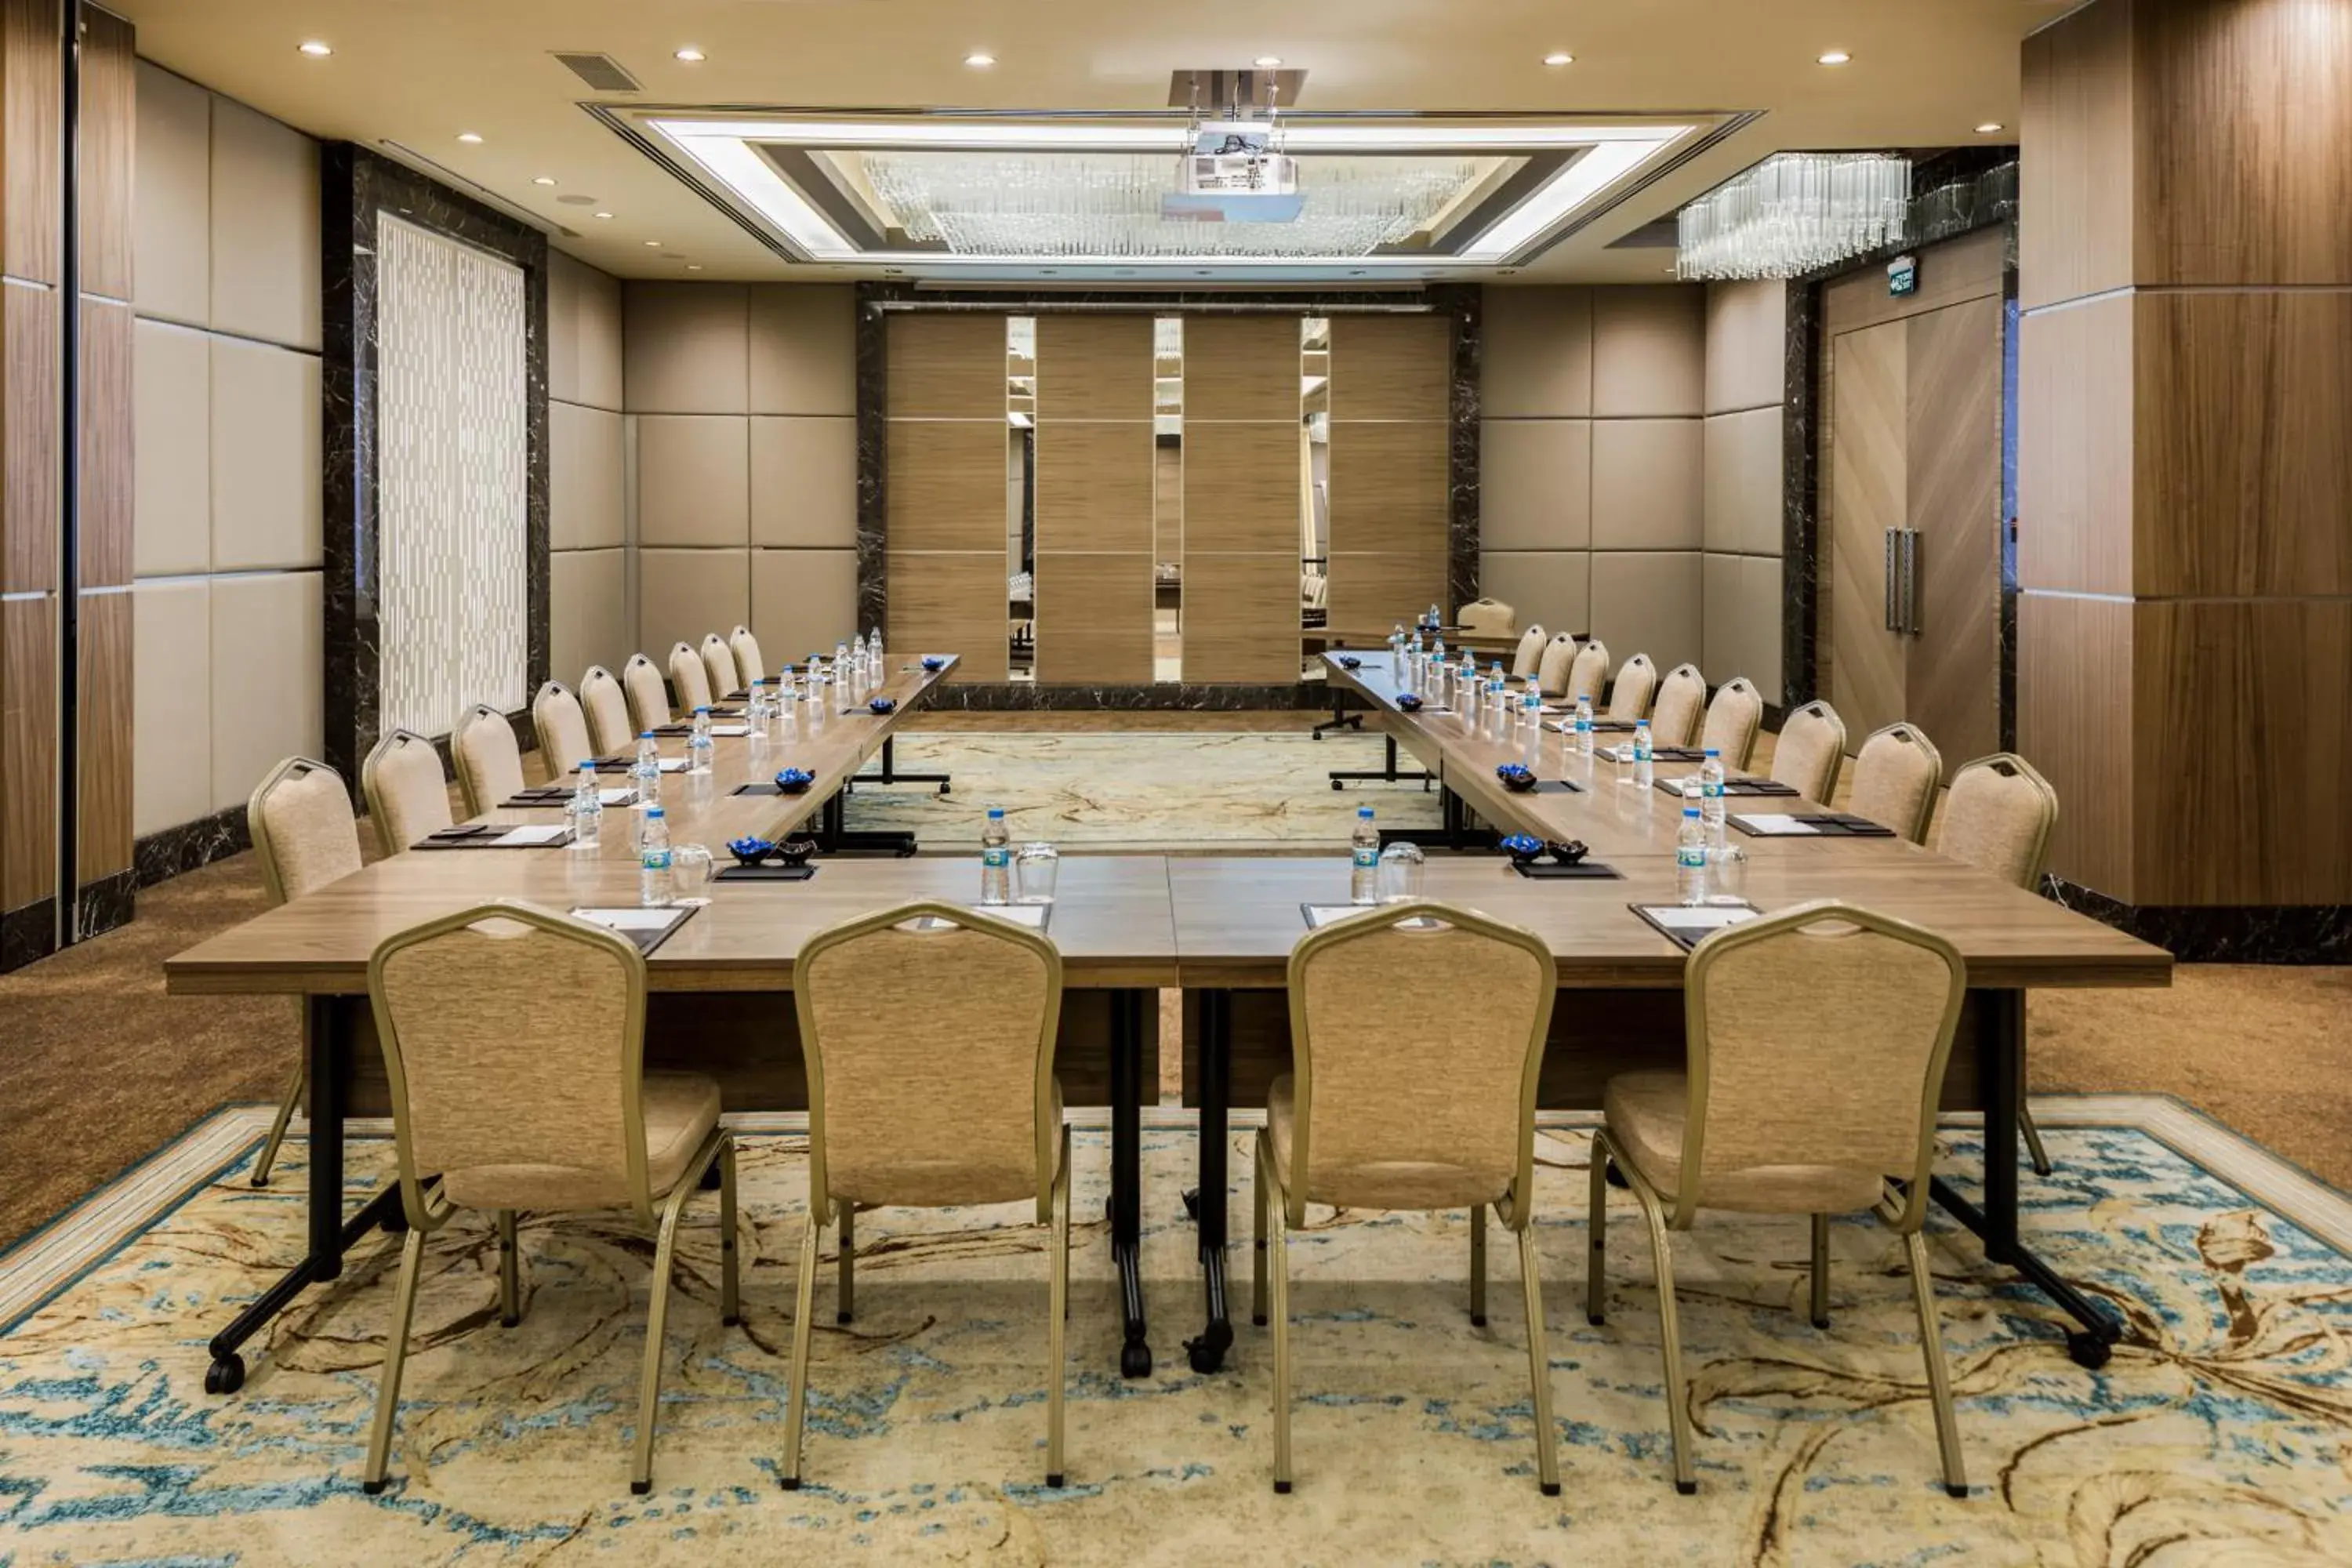 Meeting/conference room in Clarion Hotel Golden Horn